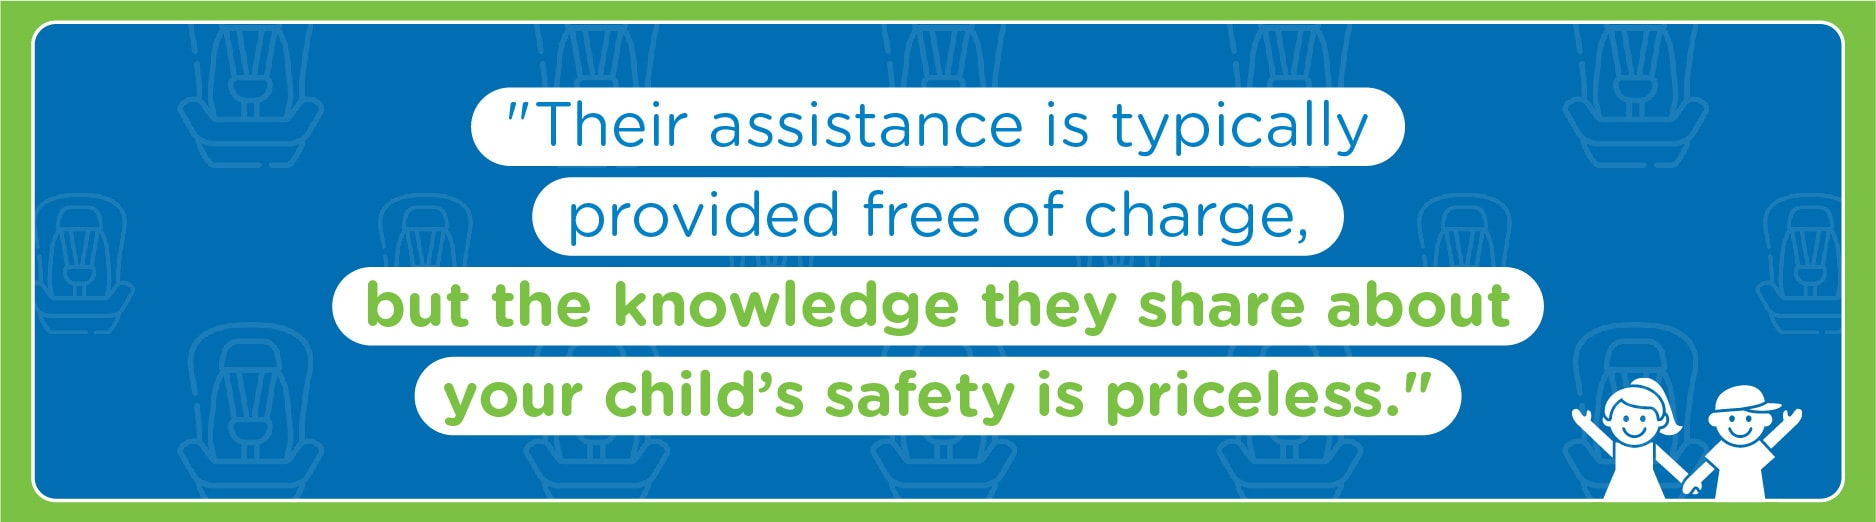 “Assistance from a CPST is typically free, but the knowledge to keep a child safety is priceless.”